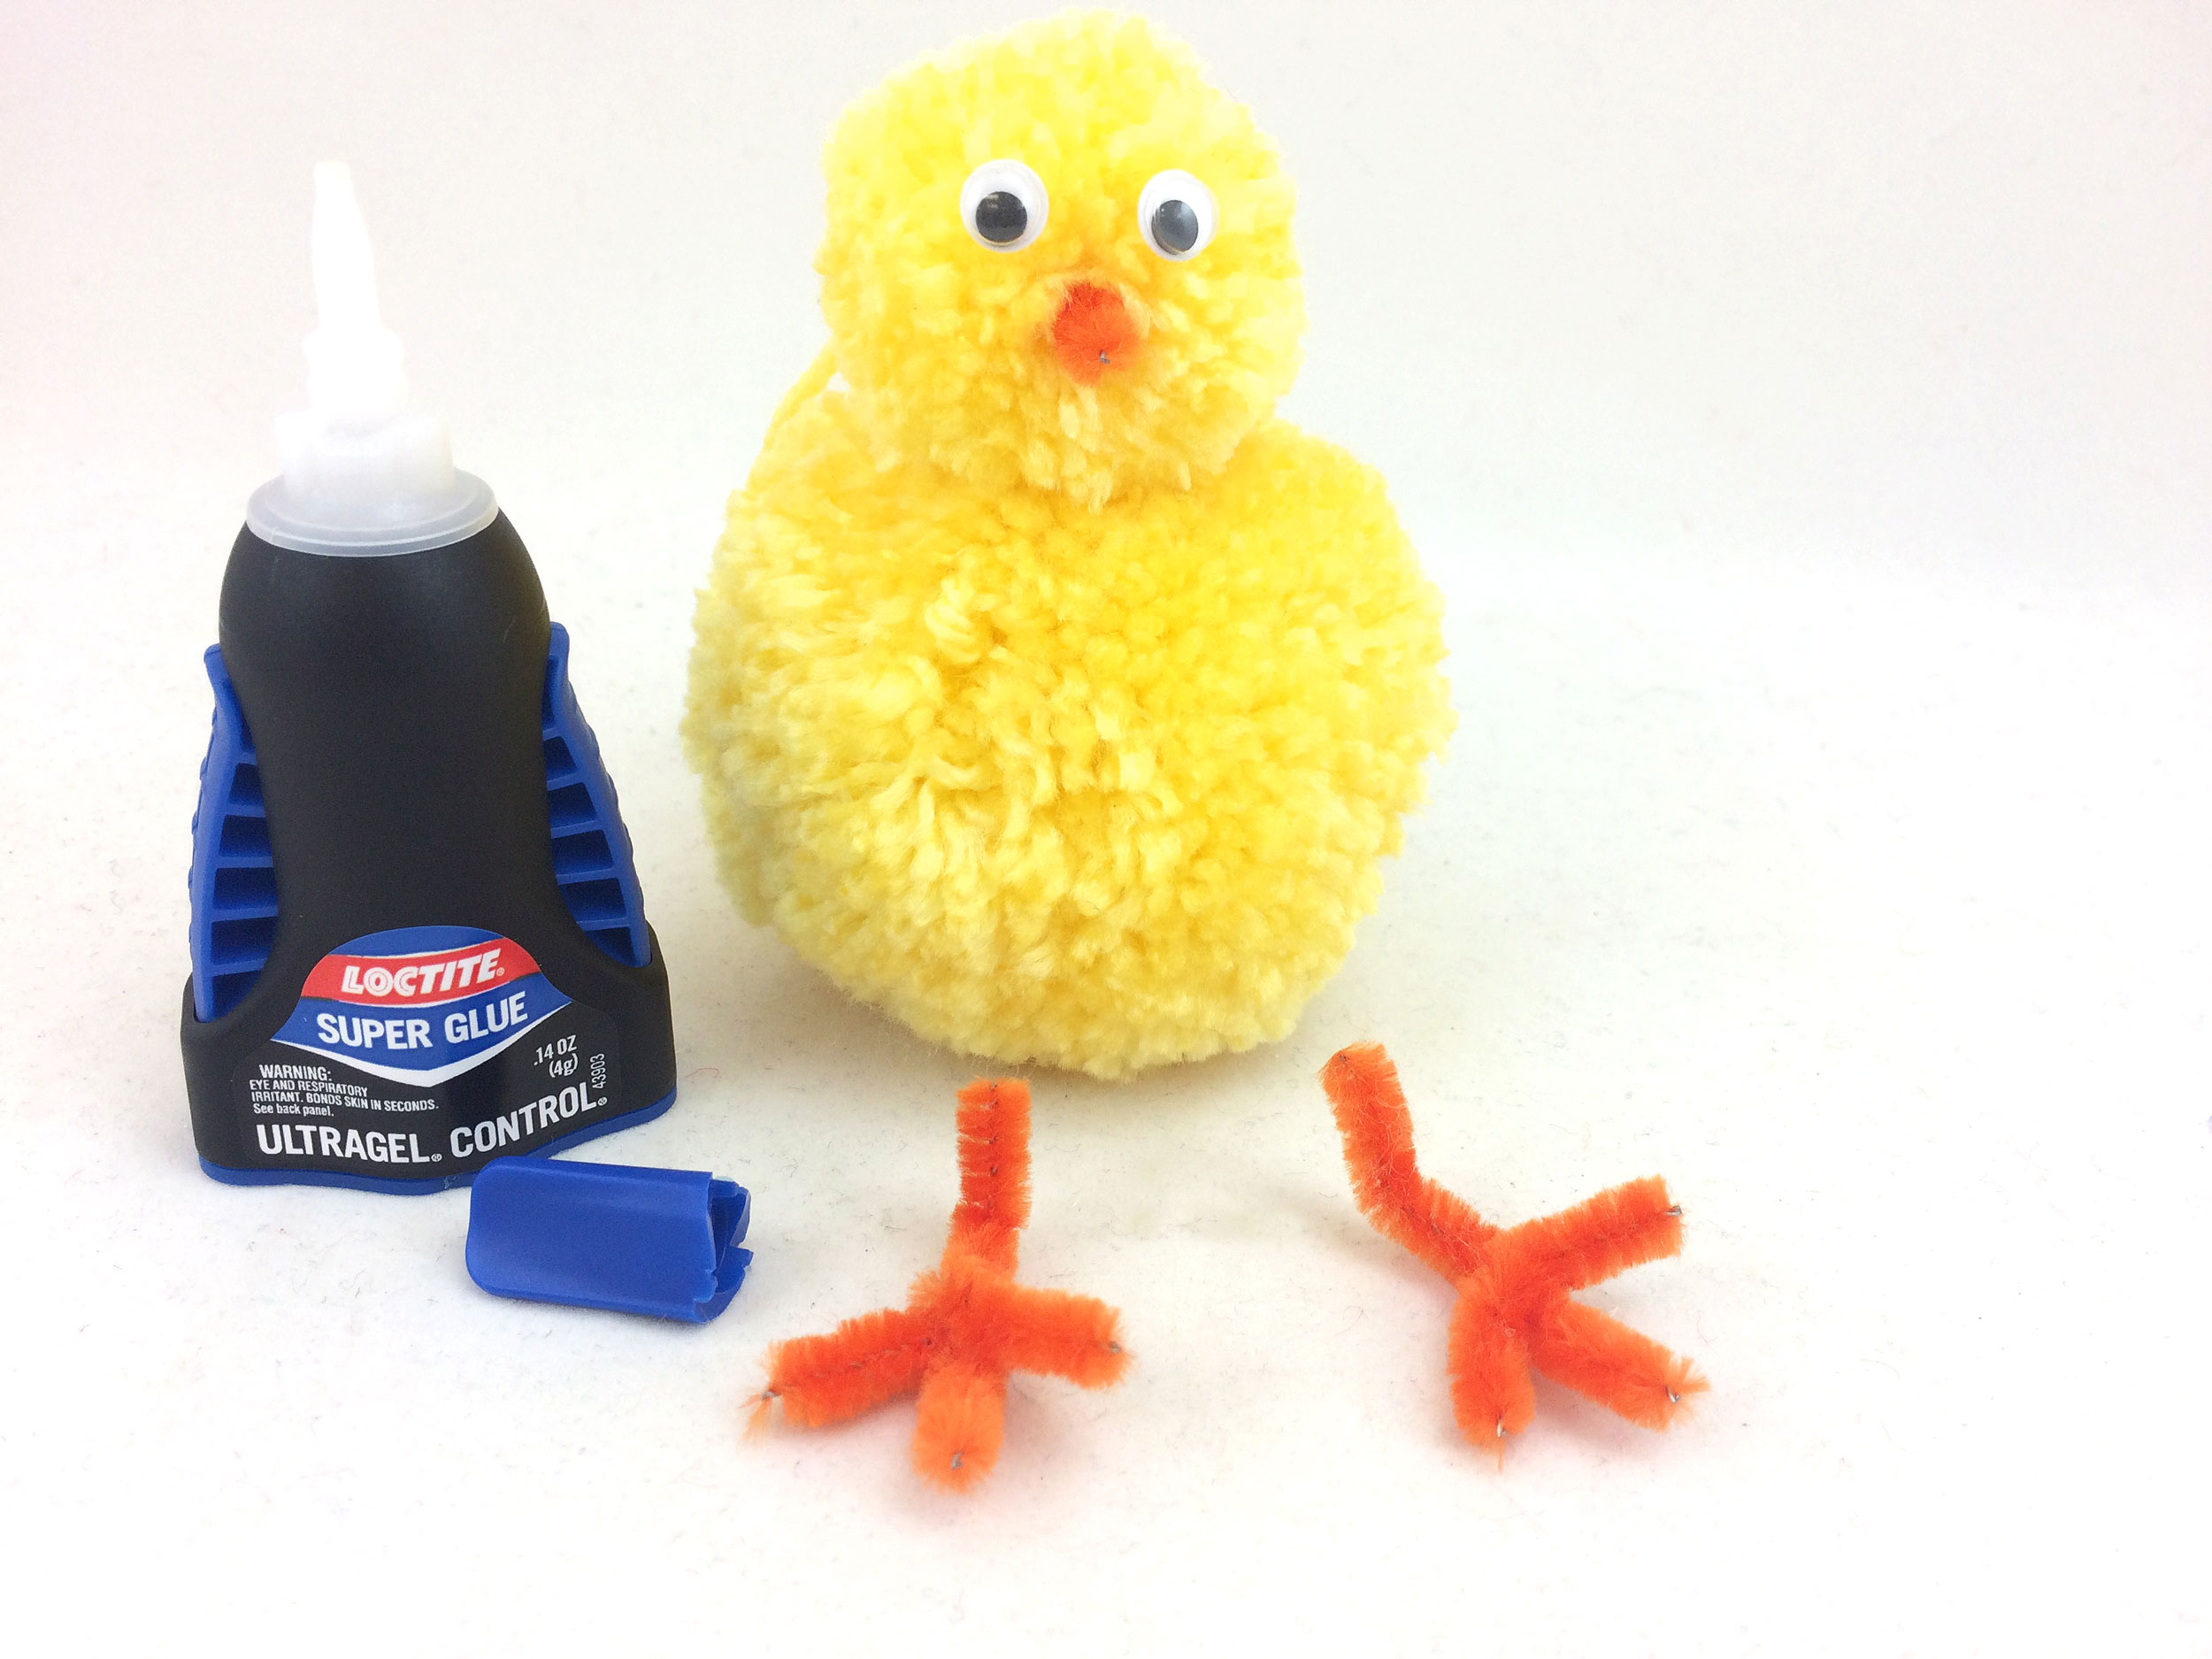 Glue googly eyes and beak to DIY Easter Chick head and pipe cleaner feet to body. | OrnamentShop.com